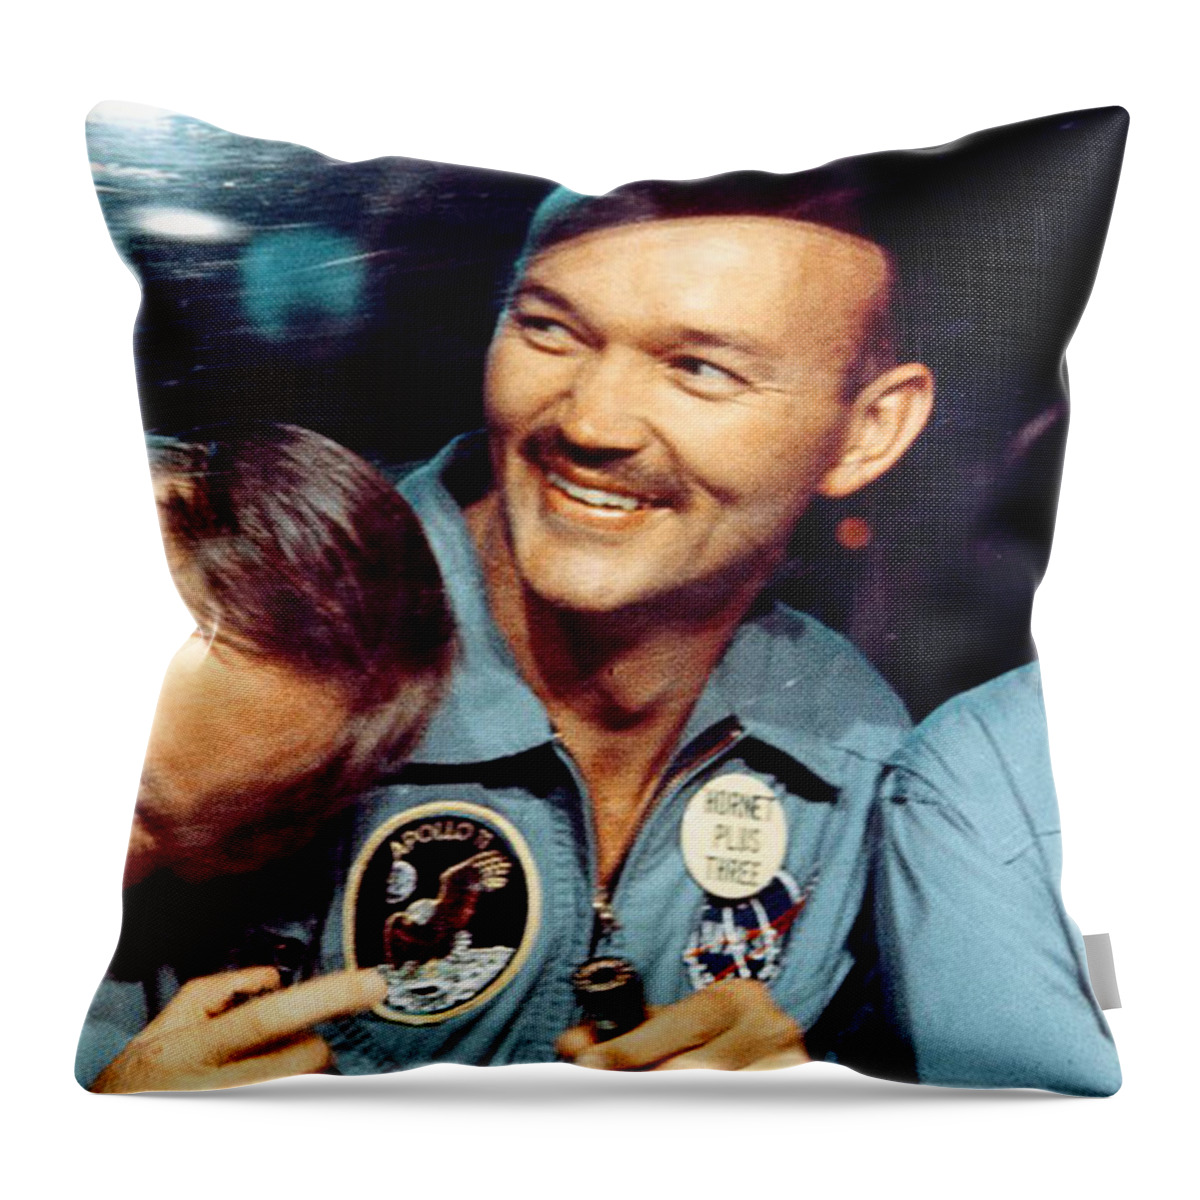 1969 Throw Pillow featuring the photograph Apollo 11, Happy To Be Home, 1969 by Science Source